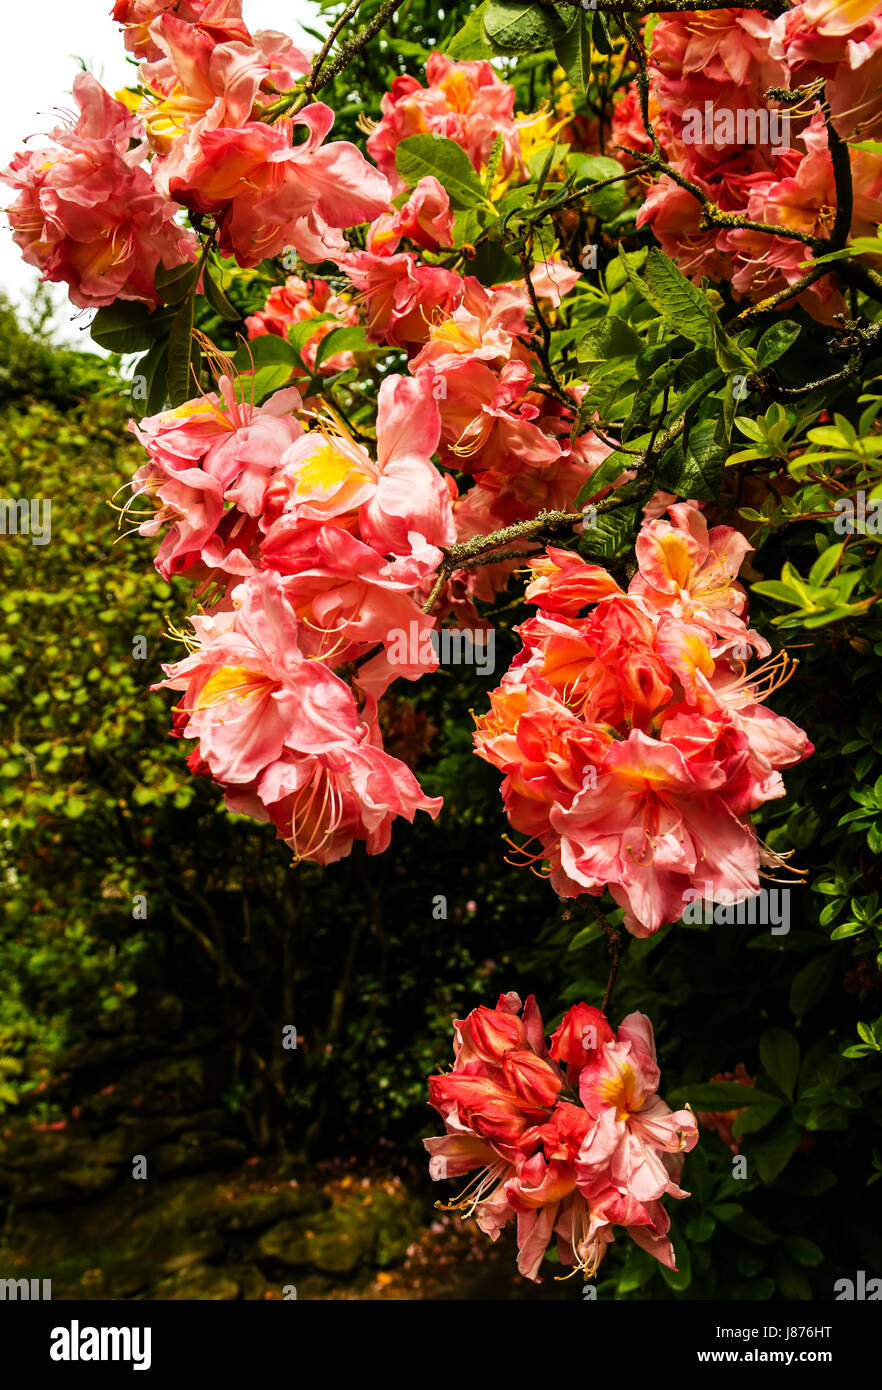 Clusters of bright orange Azalea flowers in a garden in spring time. Stock Photo